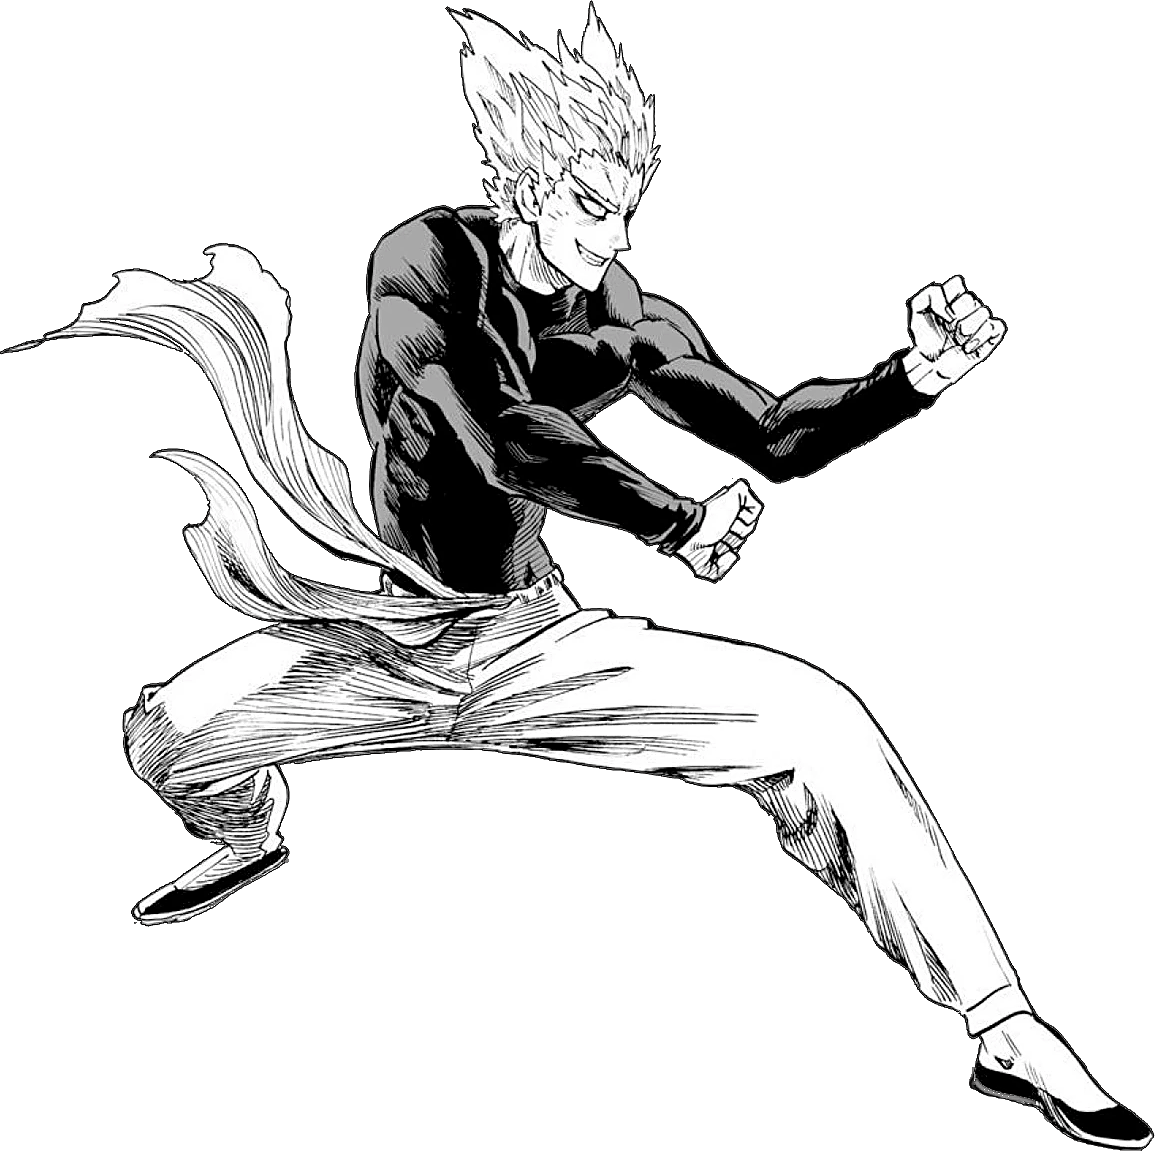 Cosmic Awakened Garou Is WAY STRONGER Than We Thought / How Strong Is He?  (One Punch Man Manga) 